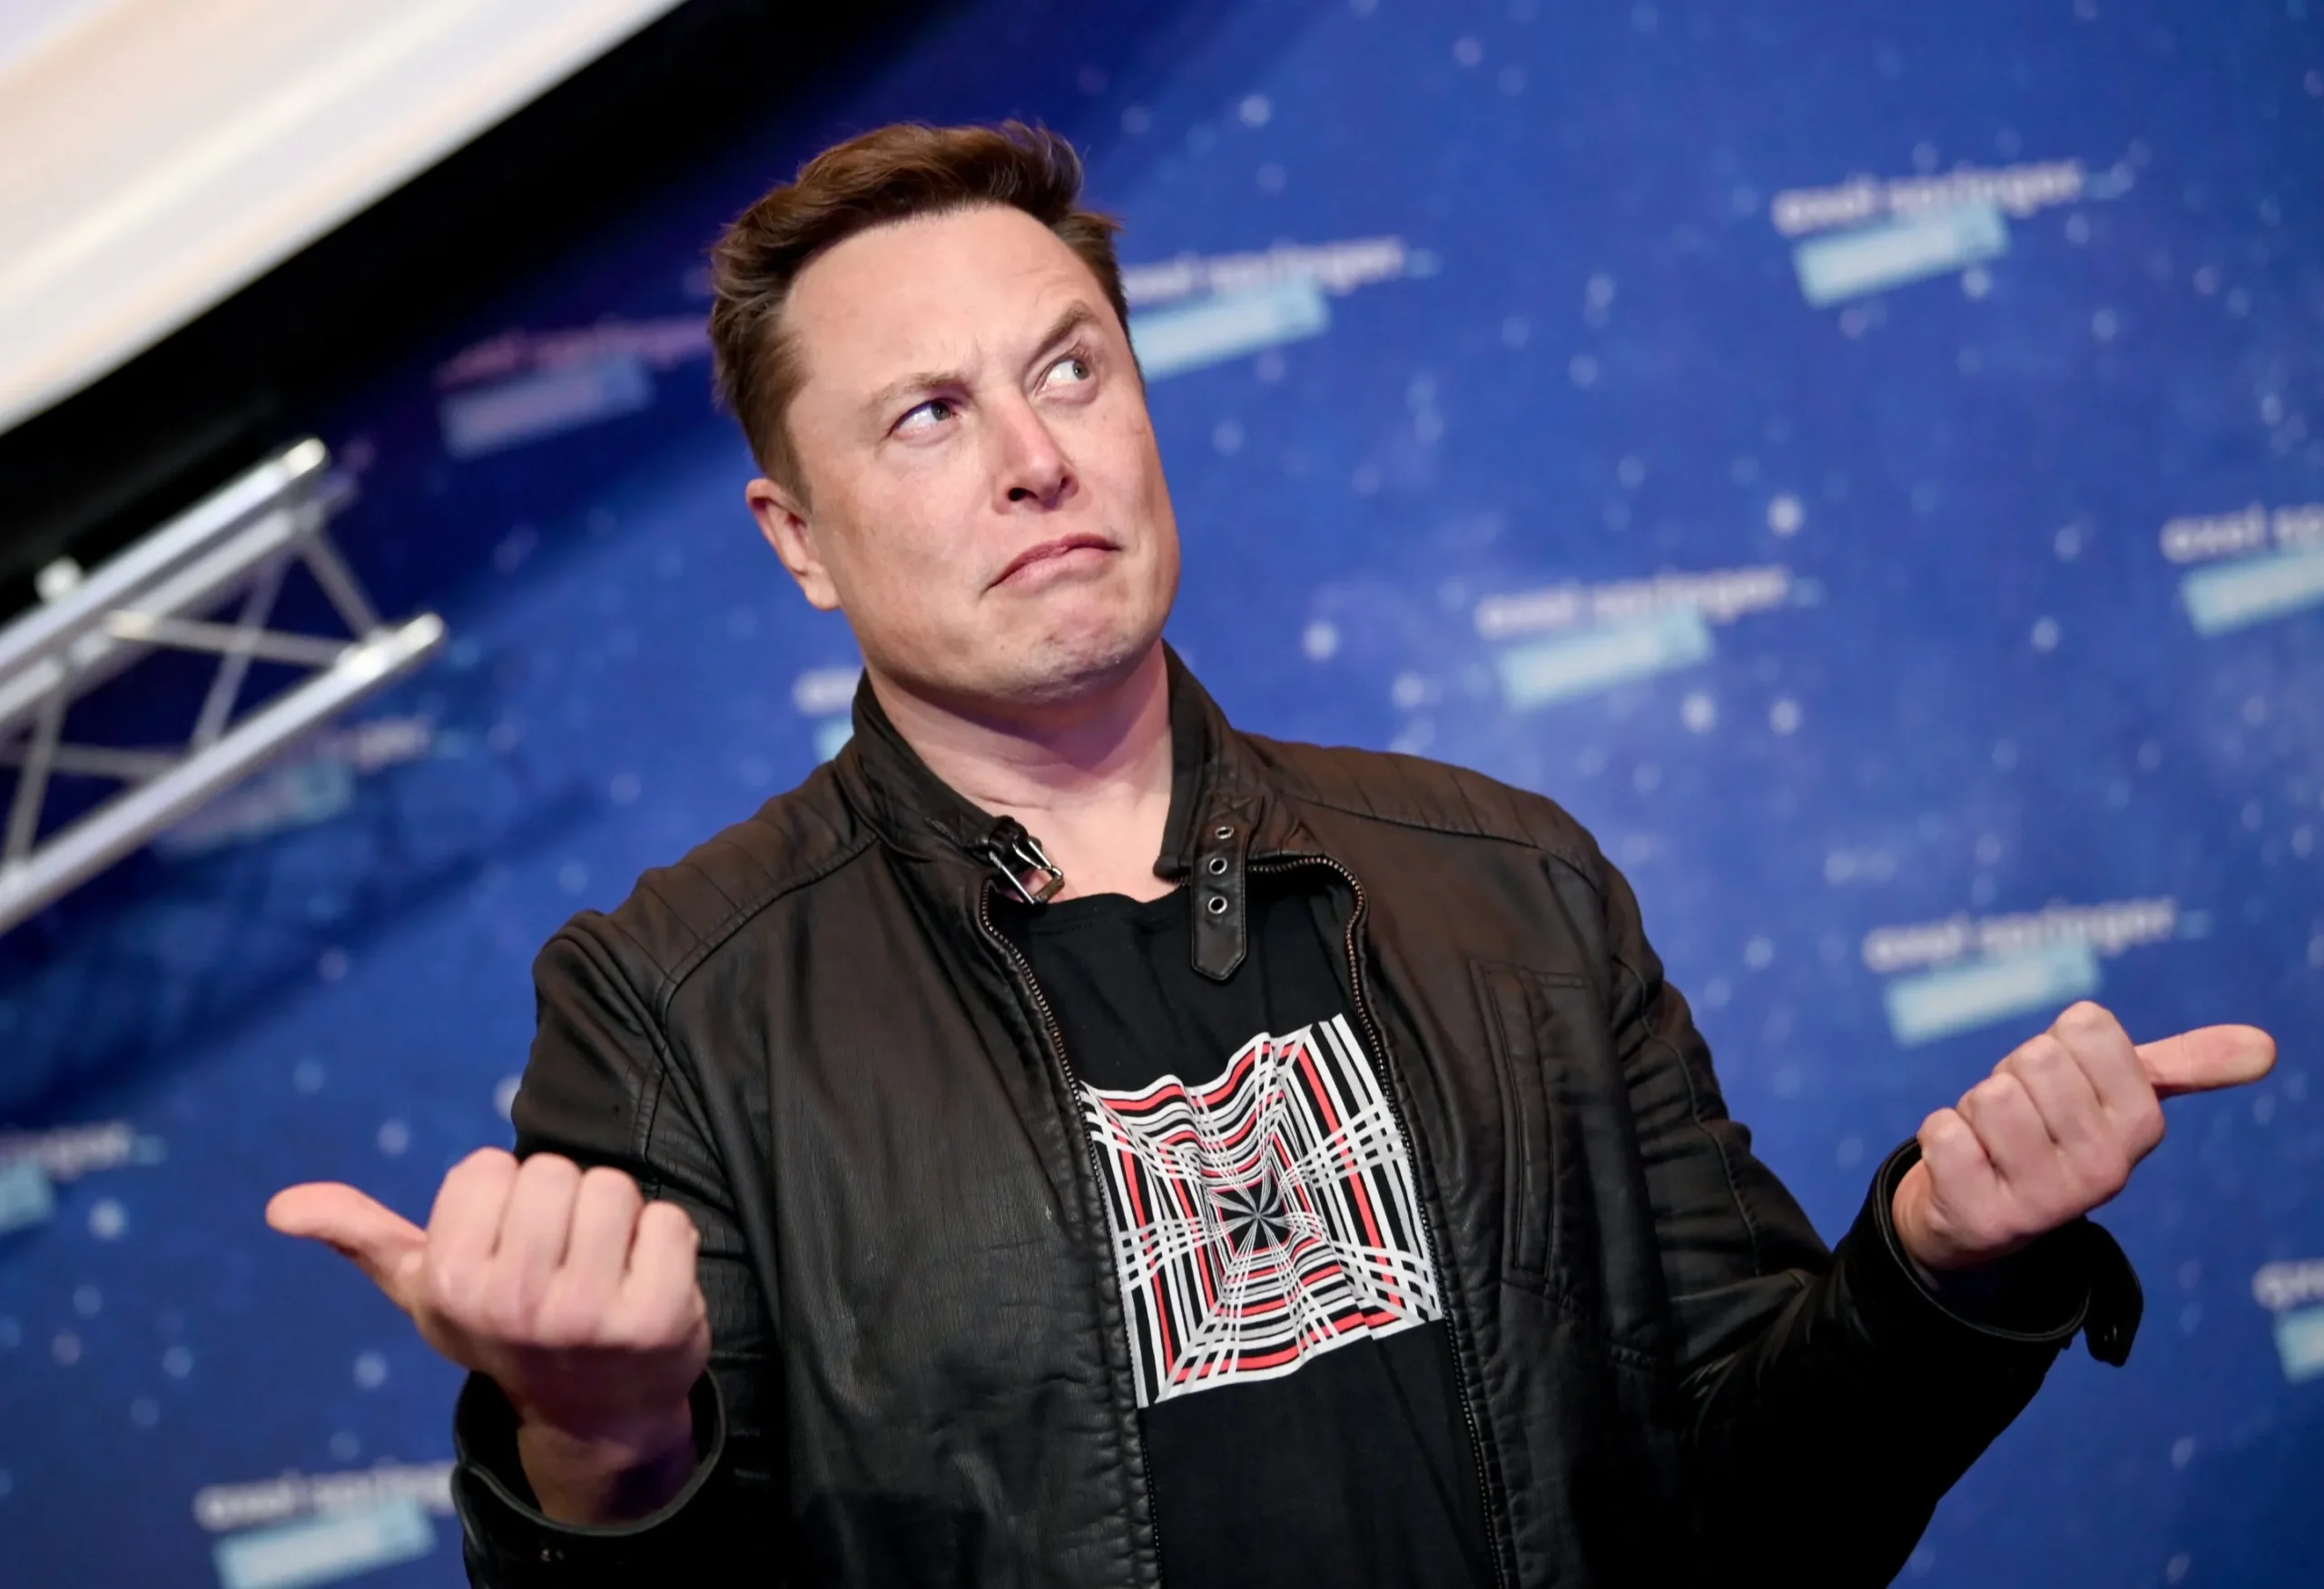 Elon Musk’s SpaceX Faces Claims of Forcing Out Workers With Unfair Deals